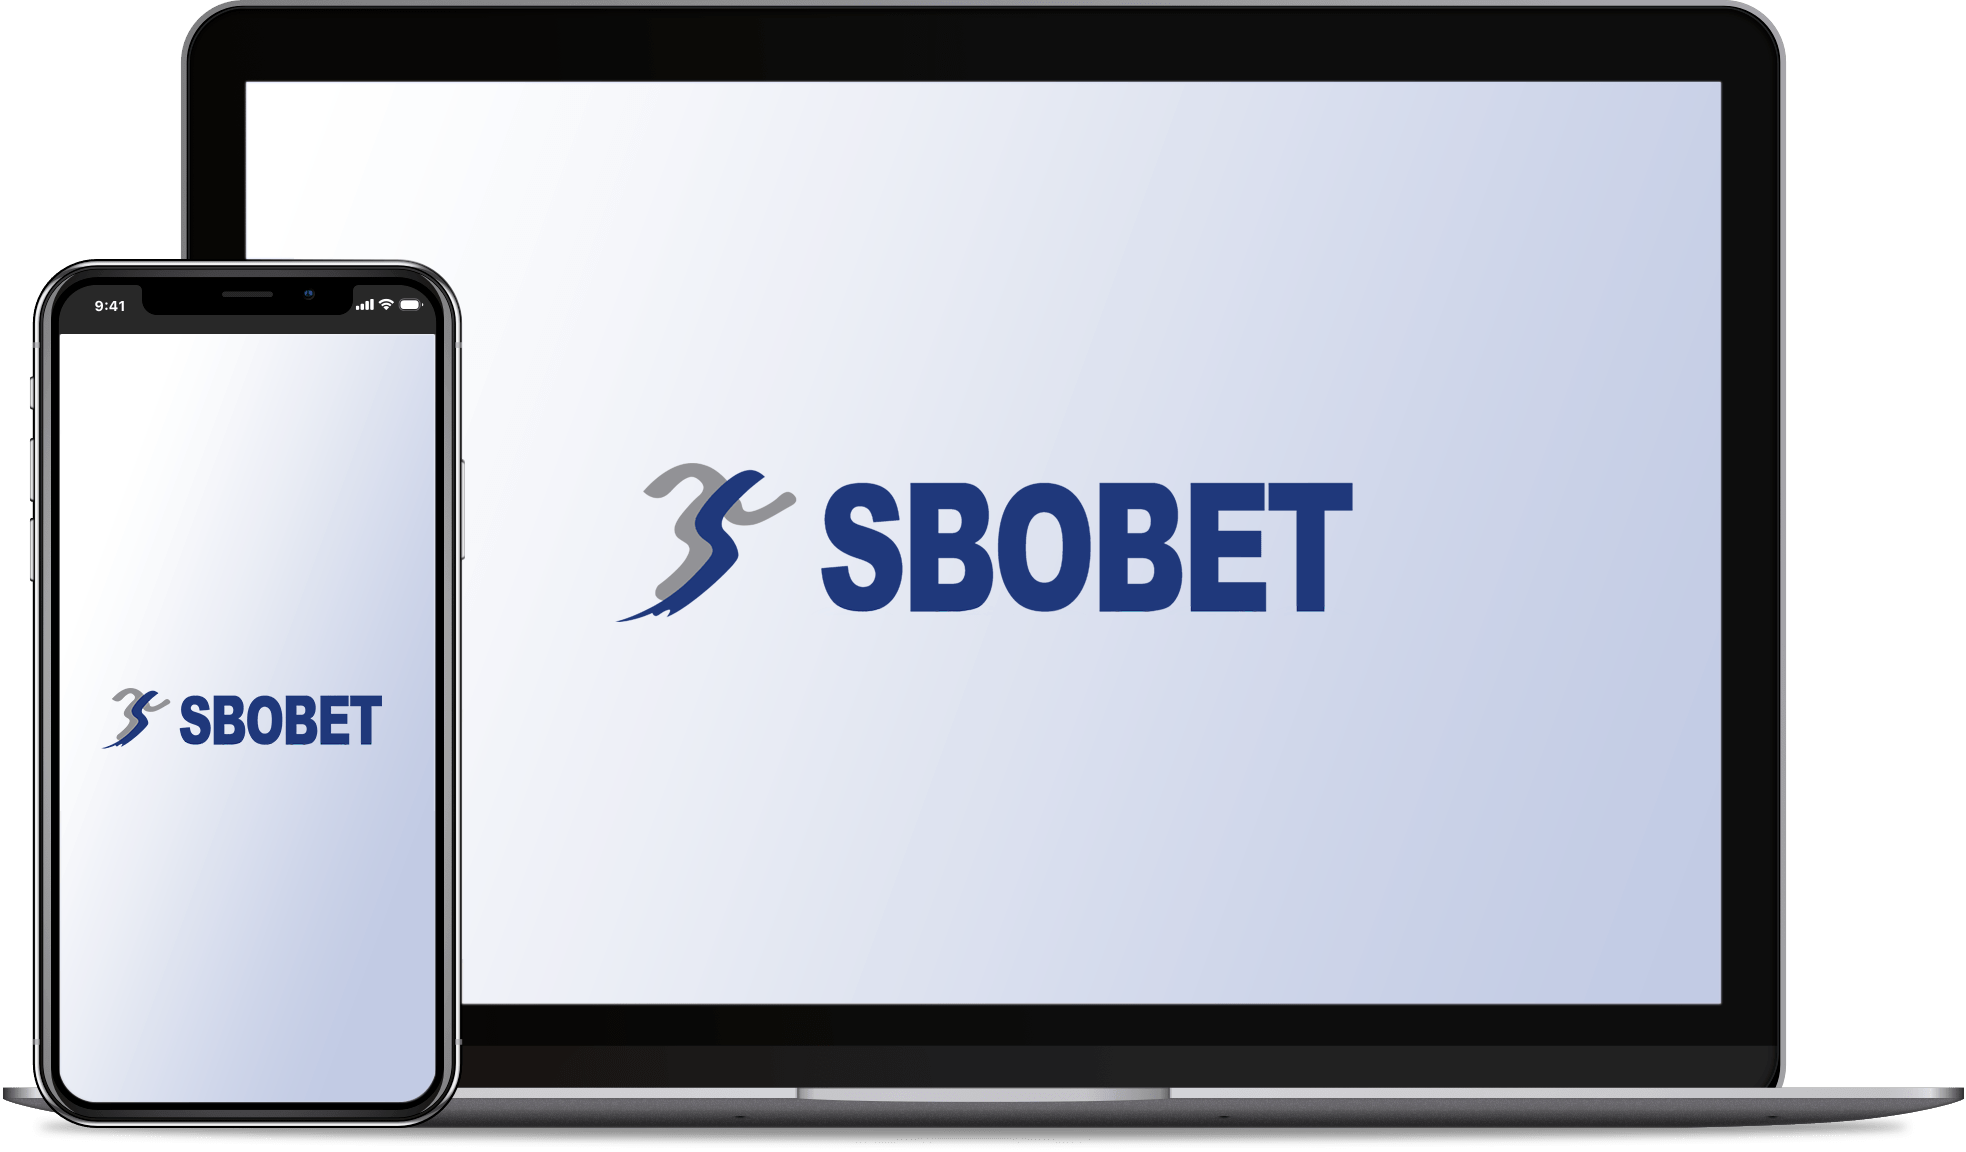 Bet with sbobet88 slot, and win offers and bonuses daily